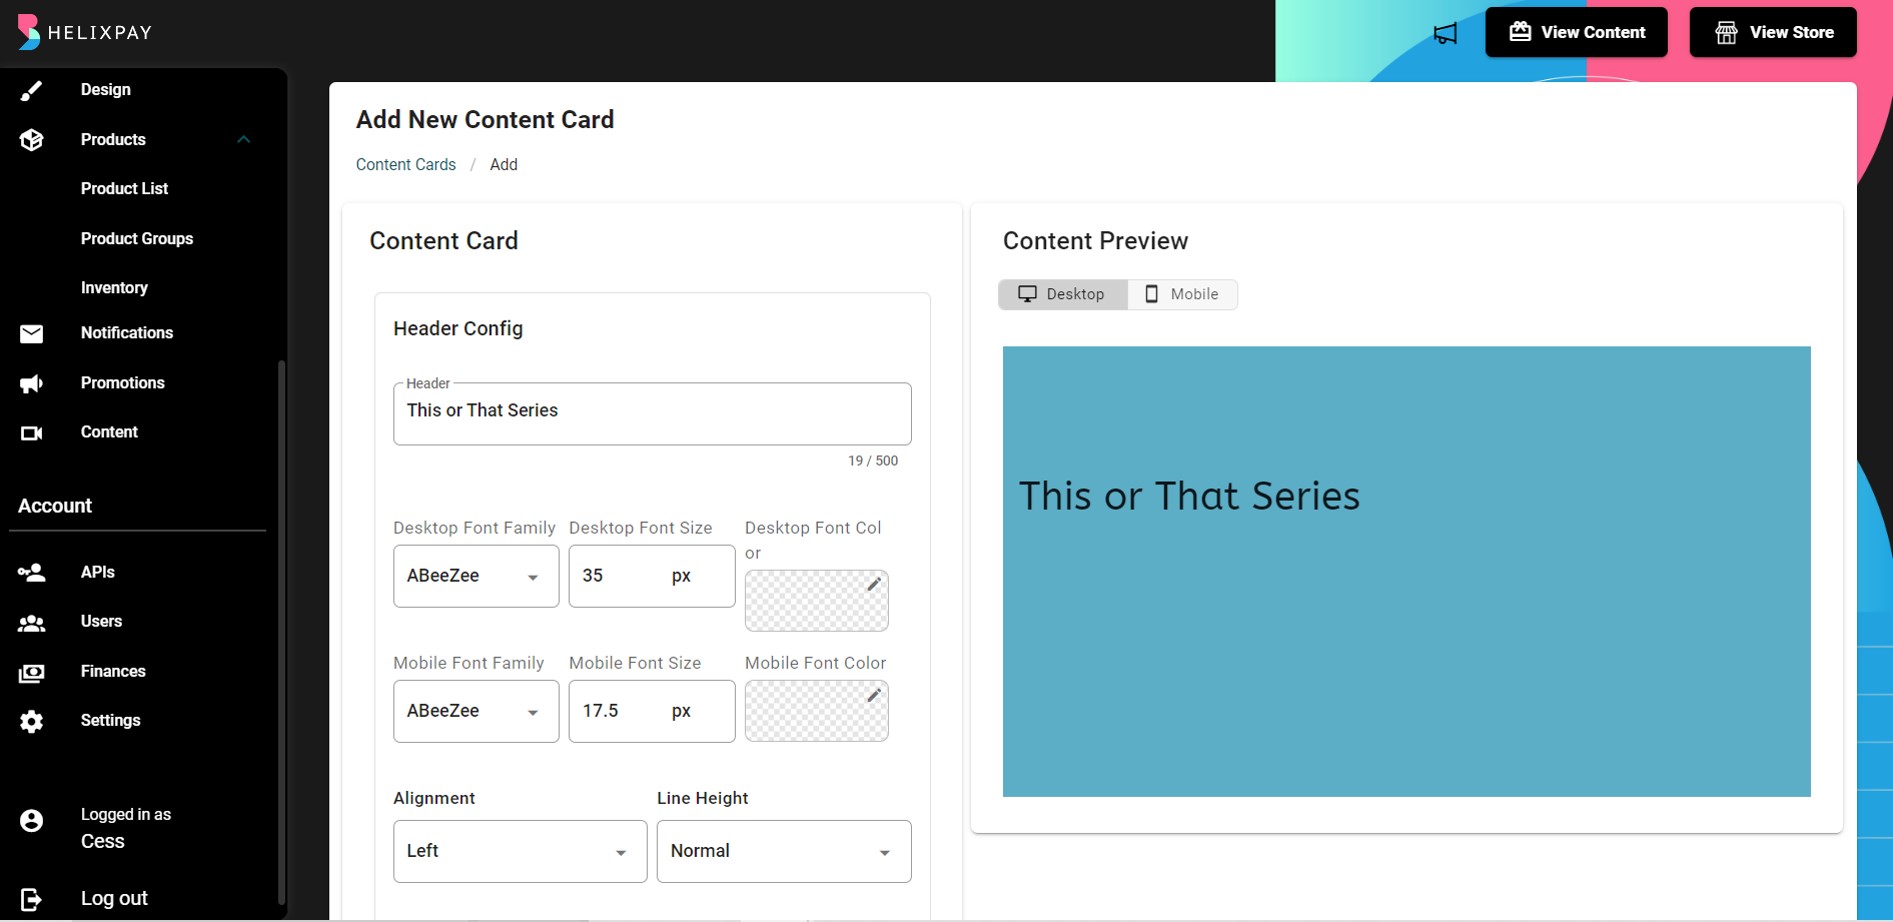 You can configure both Desktop and Mobile view and you will see the preview on the side as you configure each components of the content card.